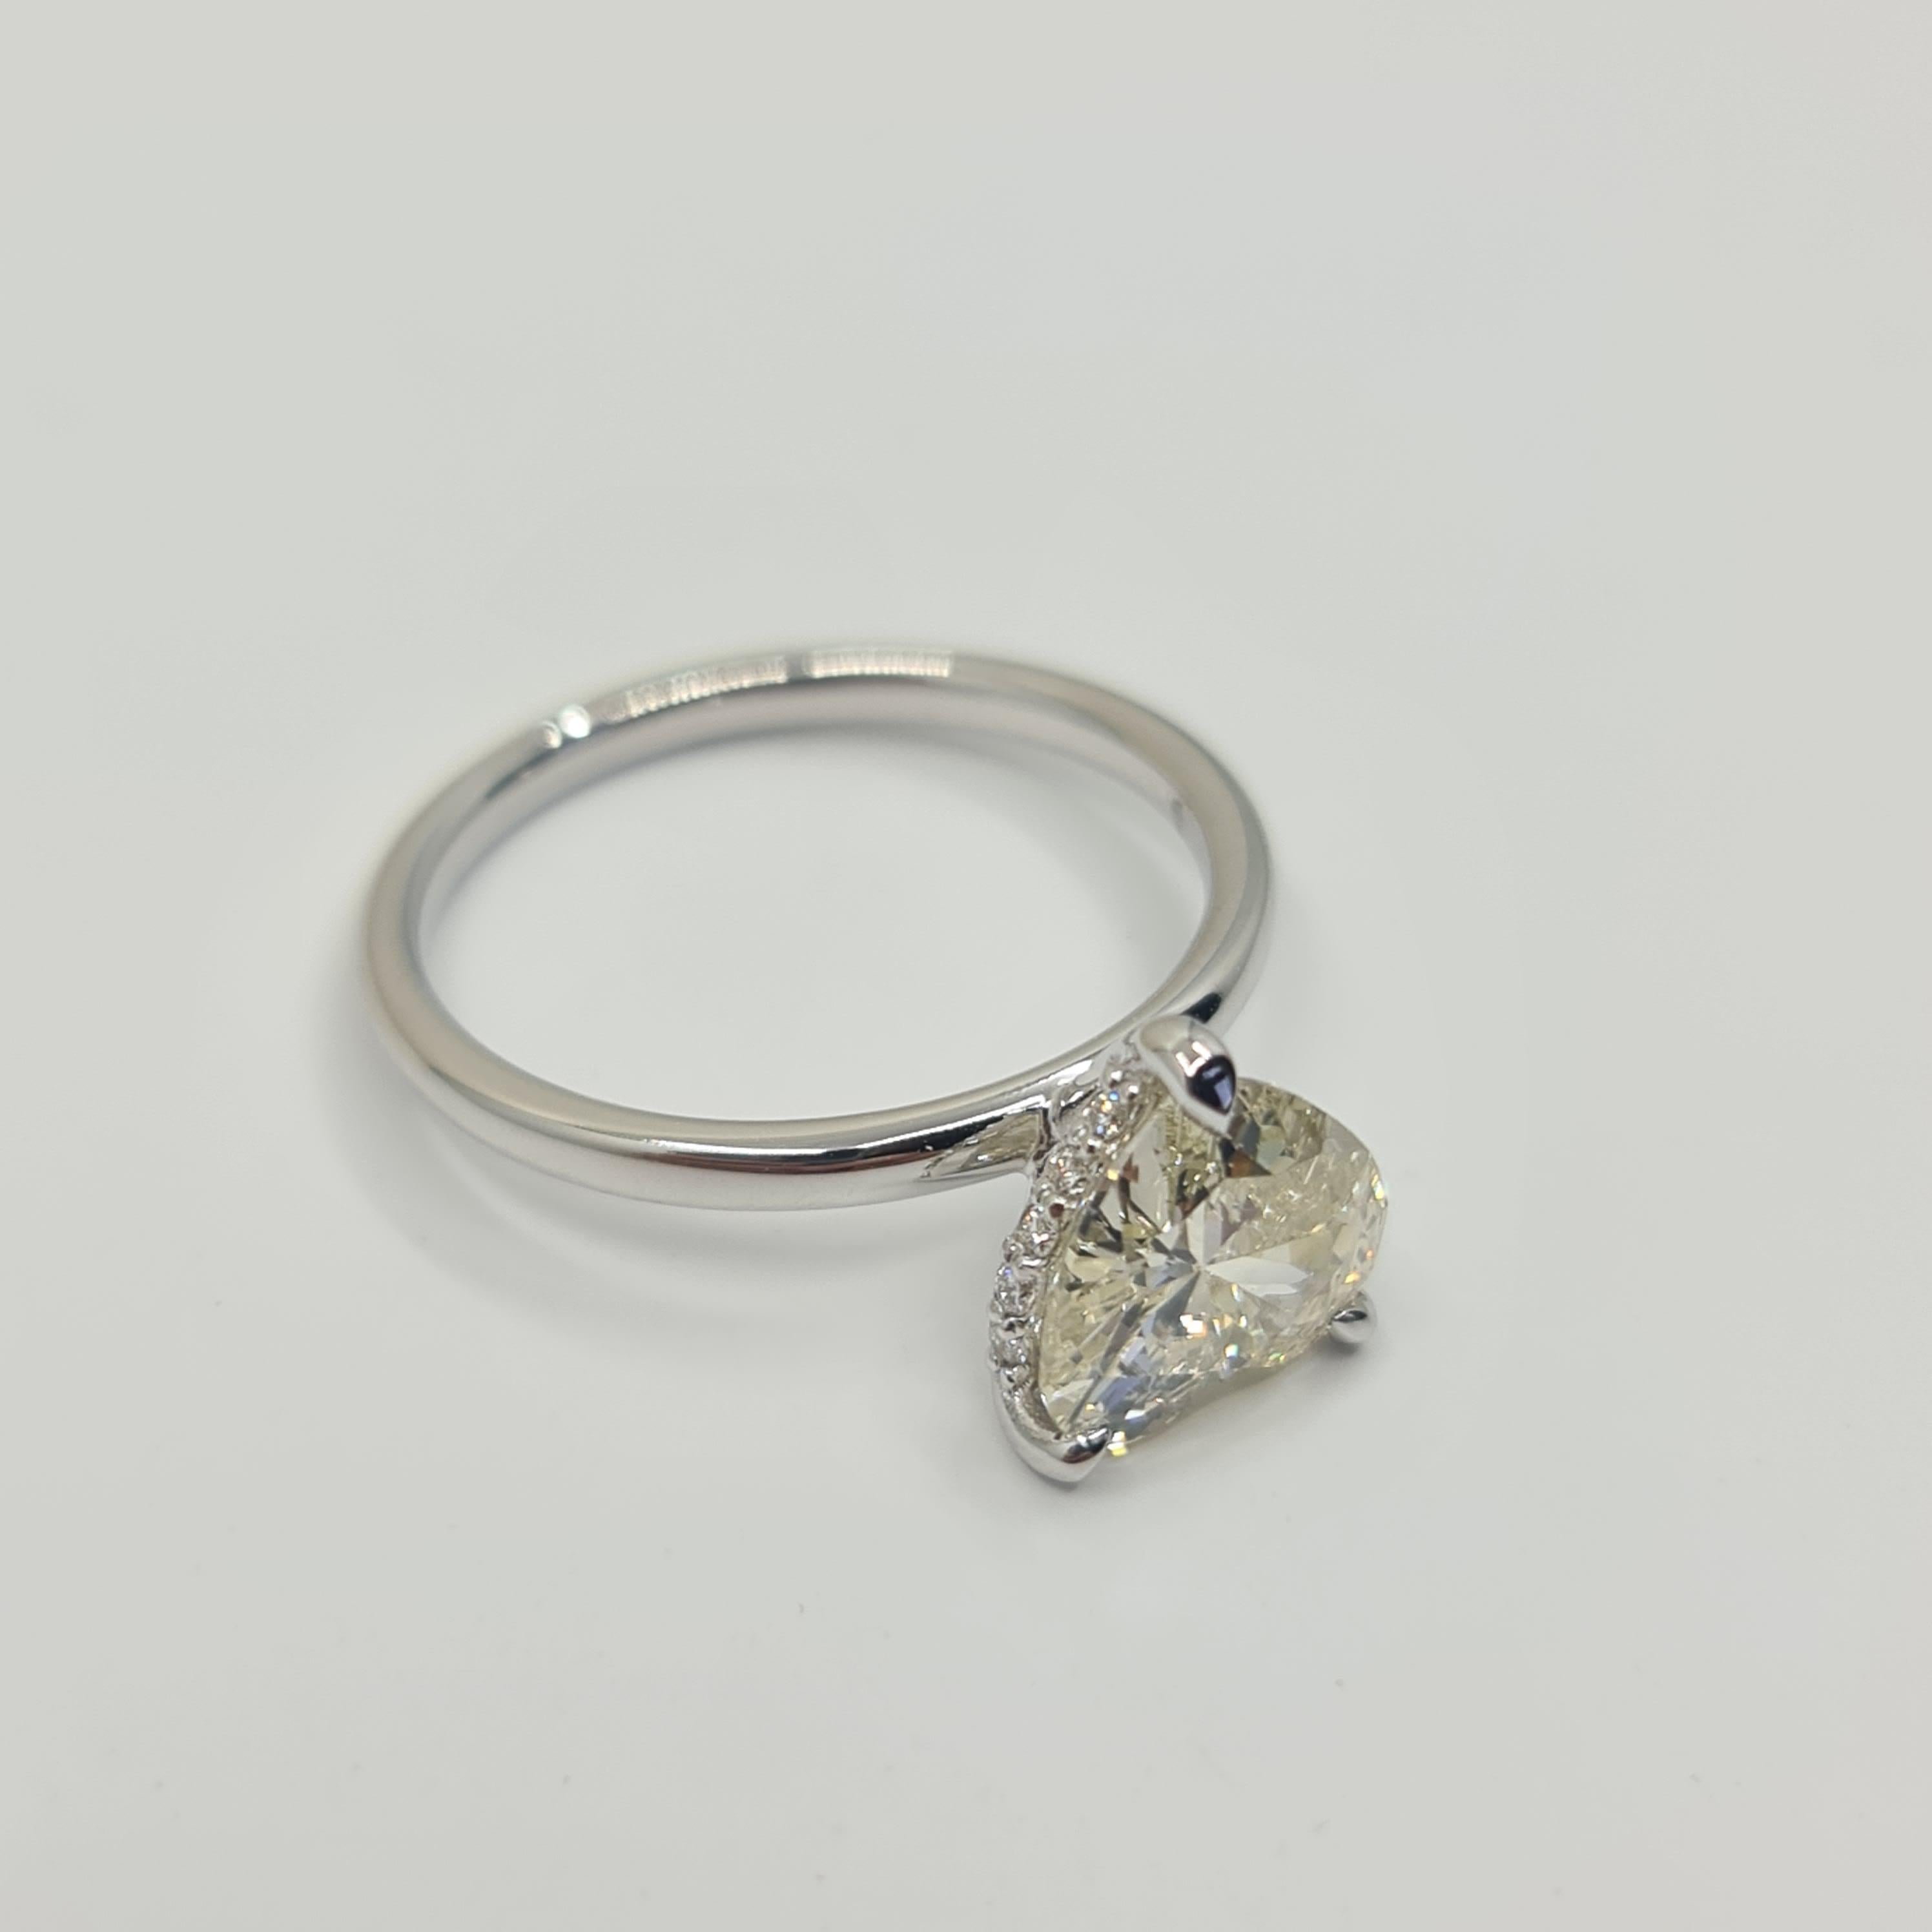 Exquisite GIA Certified 1.60 Carat Heart Diamond Ring with 0.07 Carat Halo G/VS For Sale 12